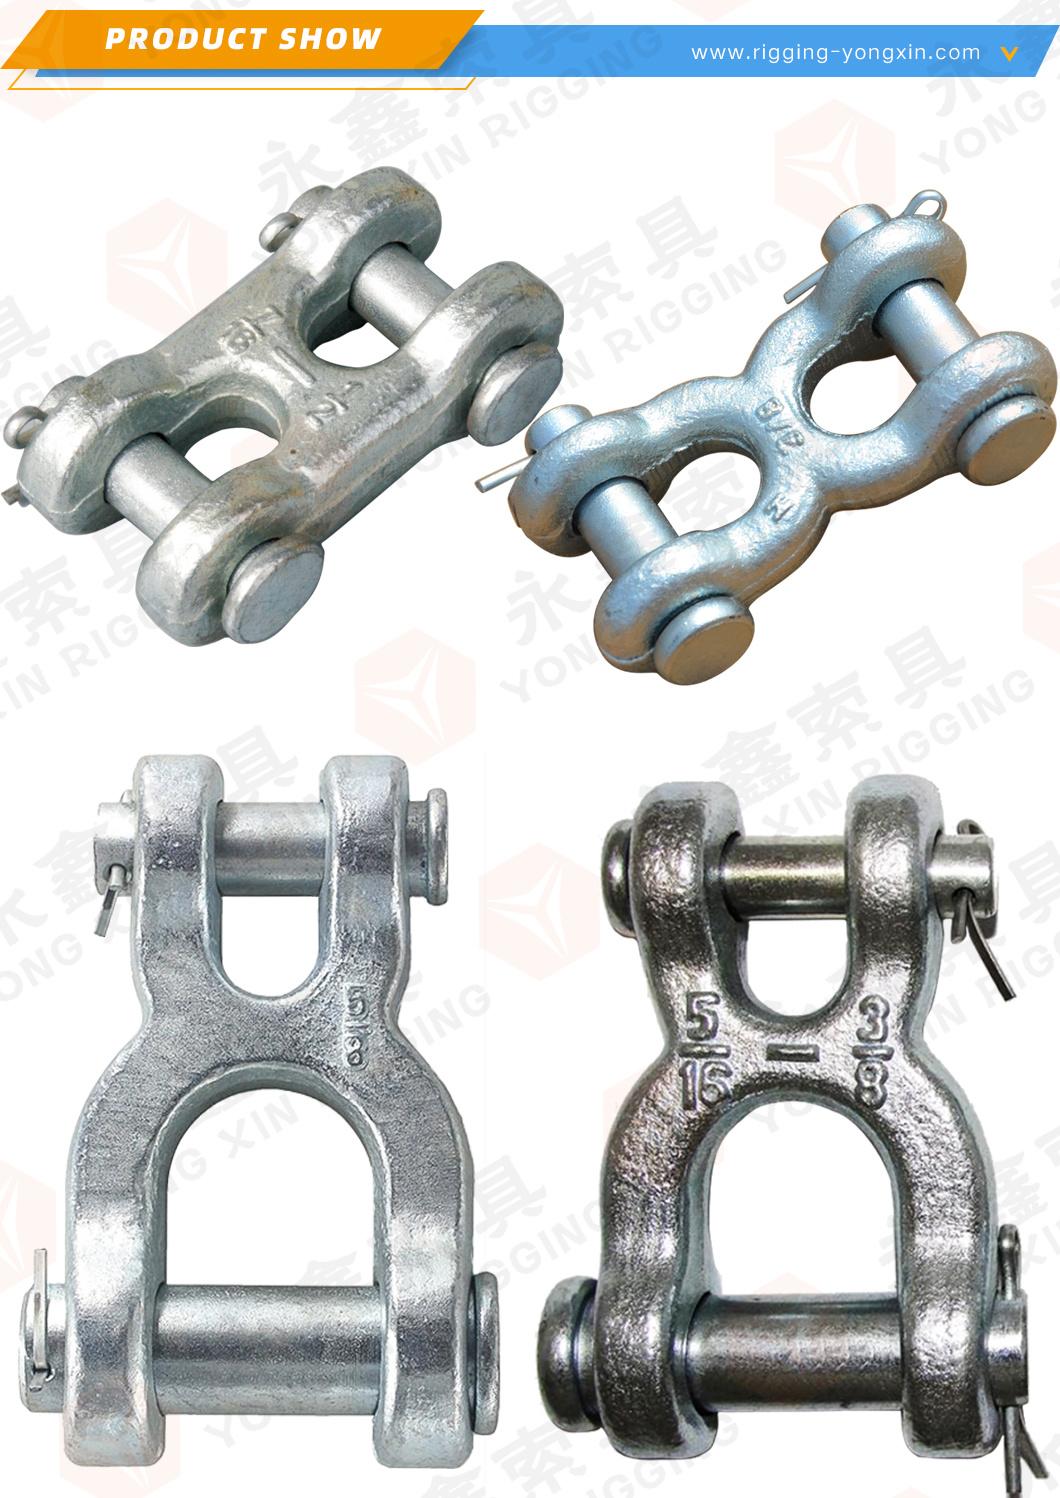 Qingdao Factory Supply Forged Fitting H-Type Connecting Double Clevis Links S Rigging Hardware with Chain